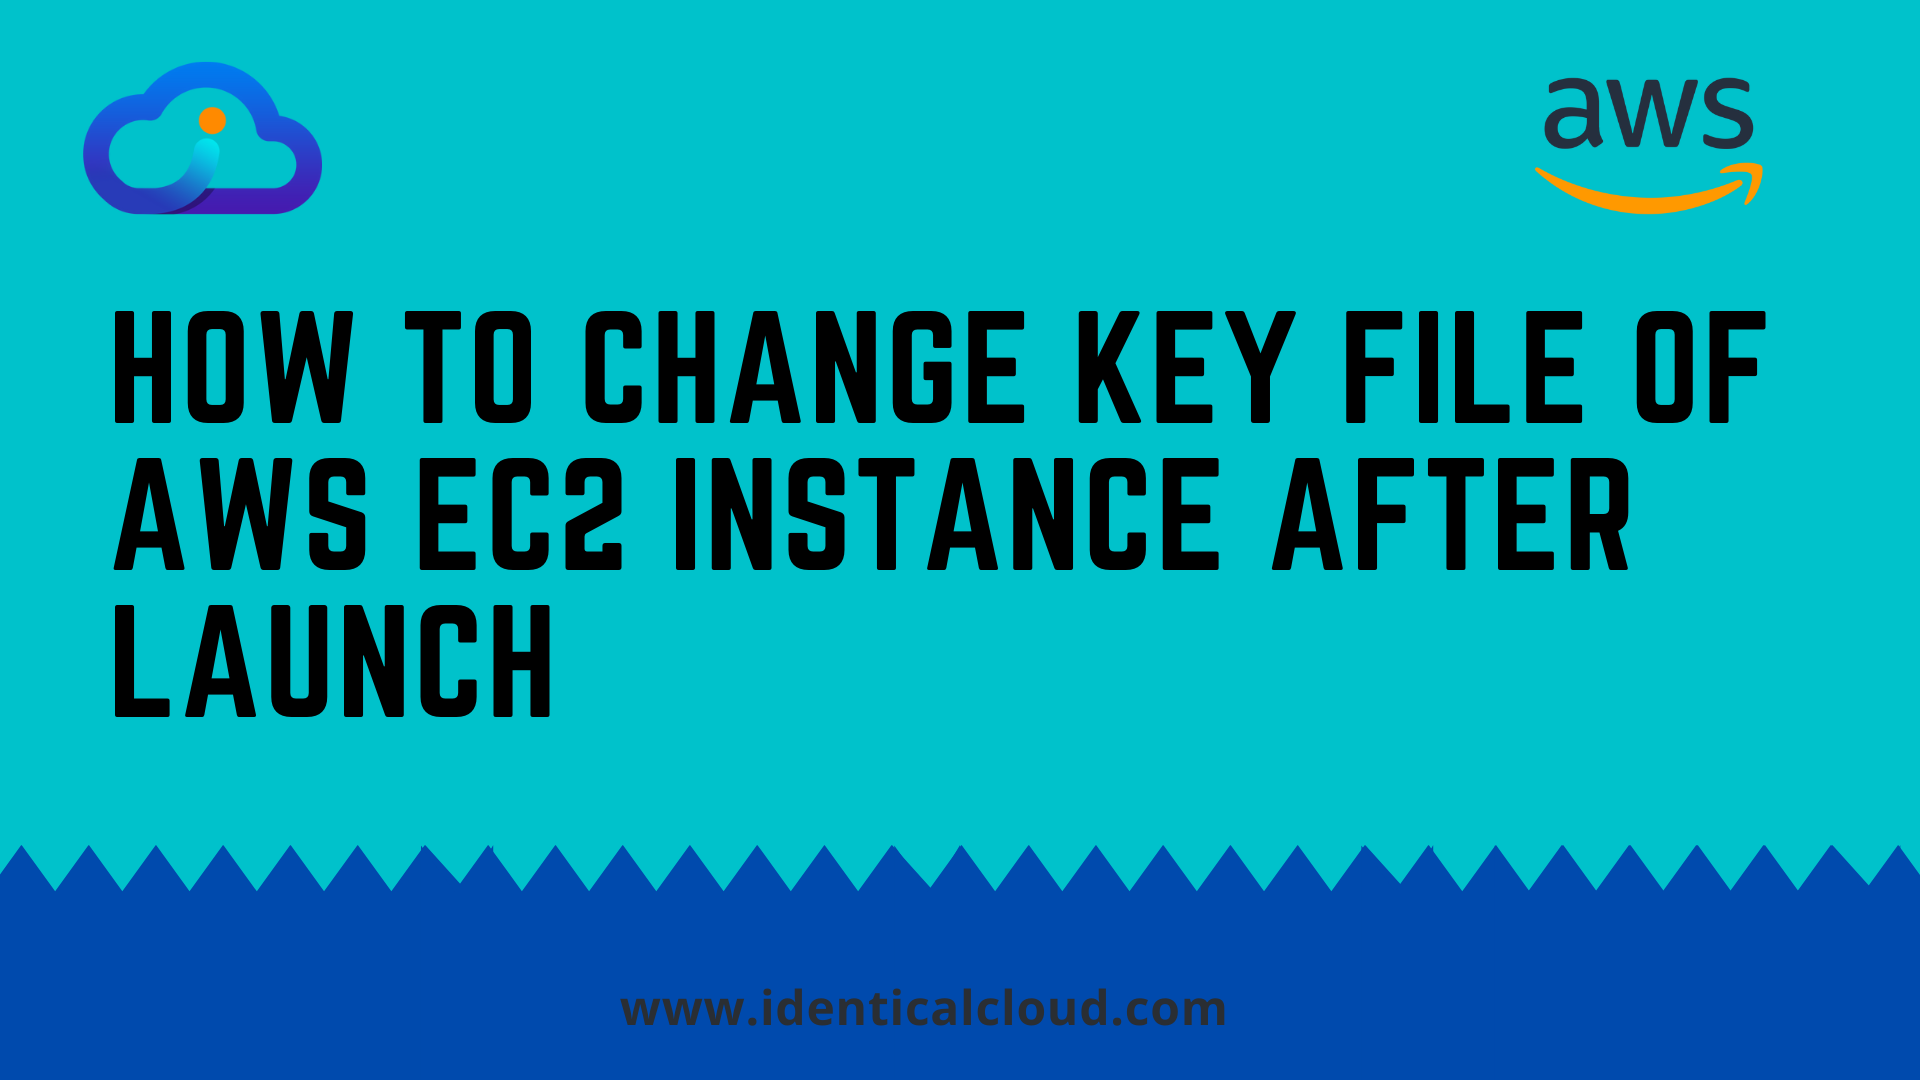 How to change key file of AWS EC2 instance after launch